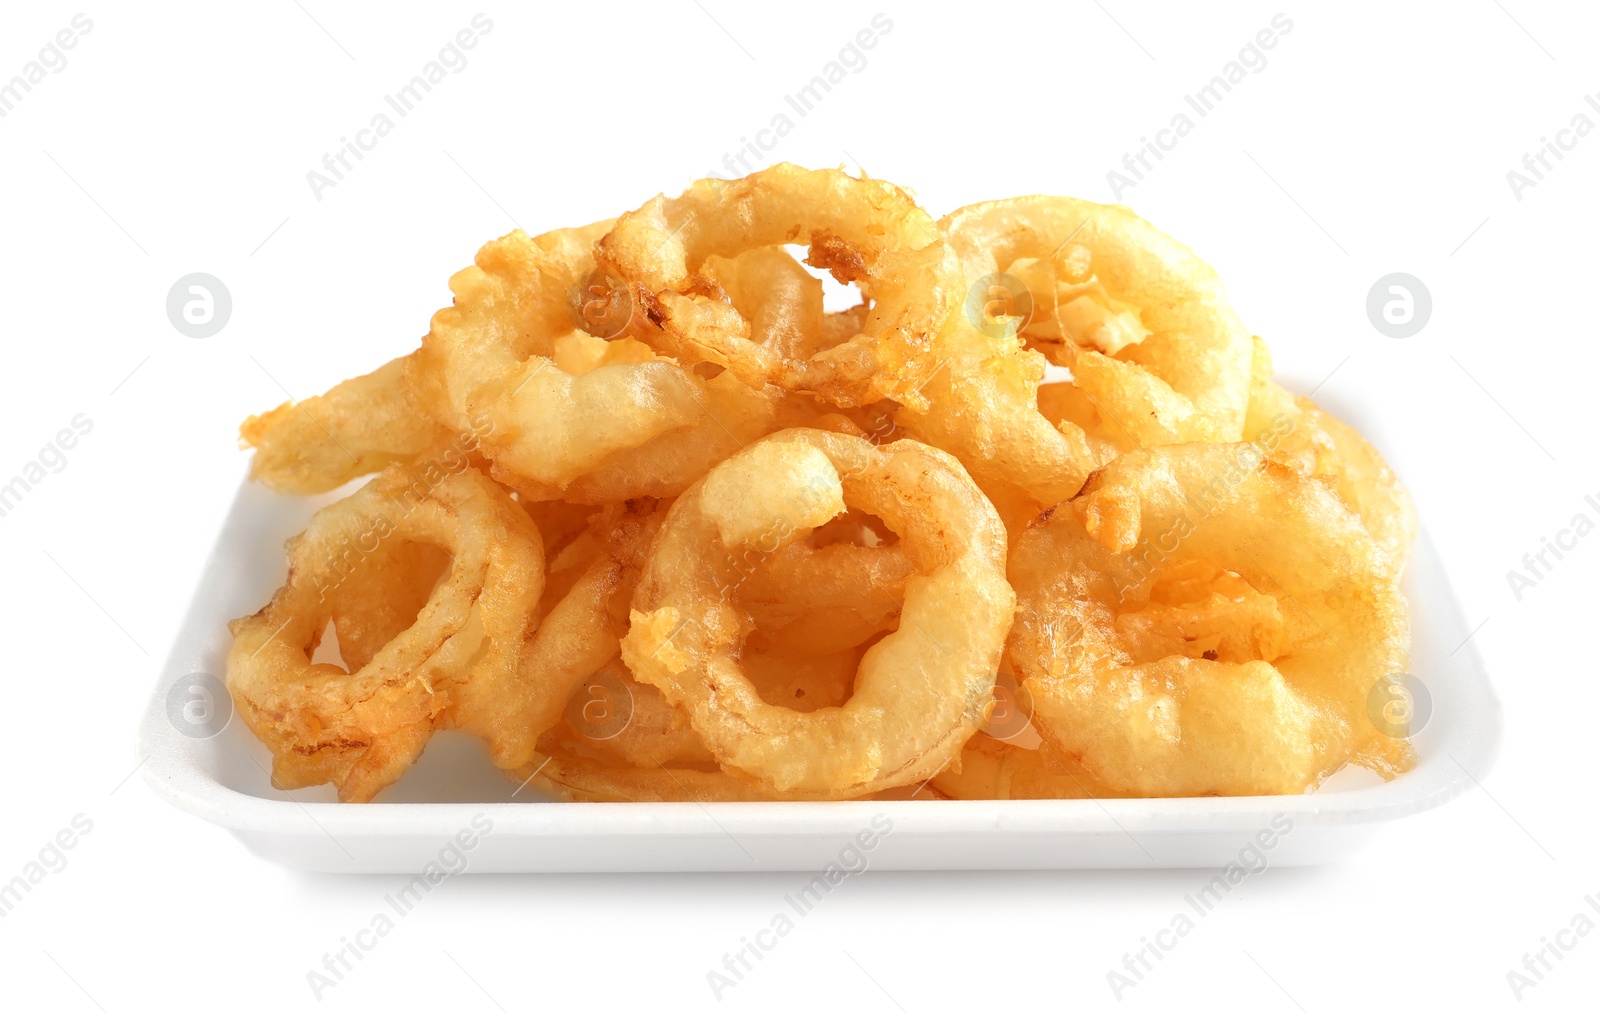 Photo of Plate with delicious golden breaded and deep fried crispy onion rings on white background